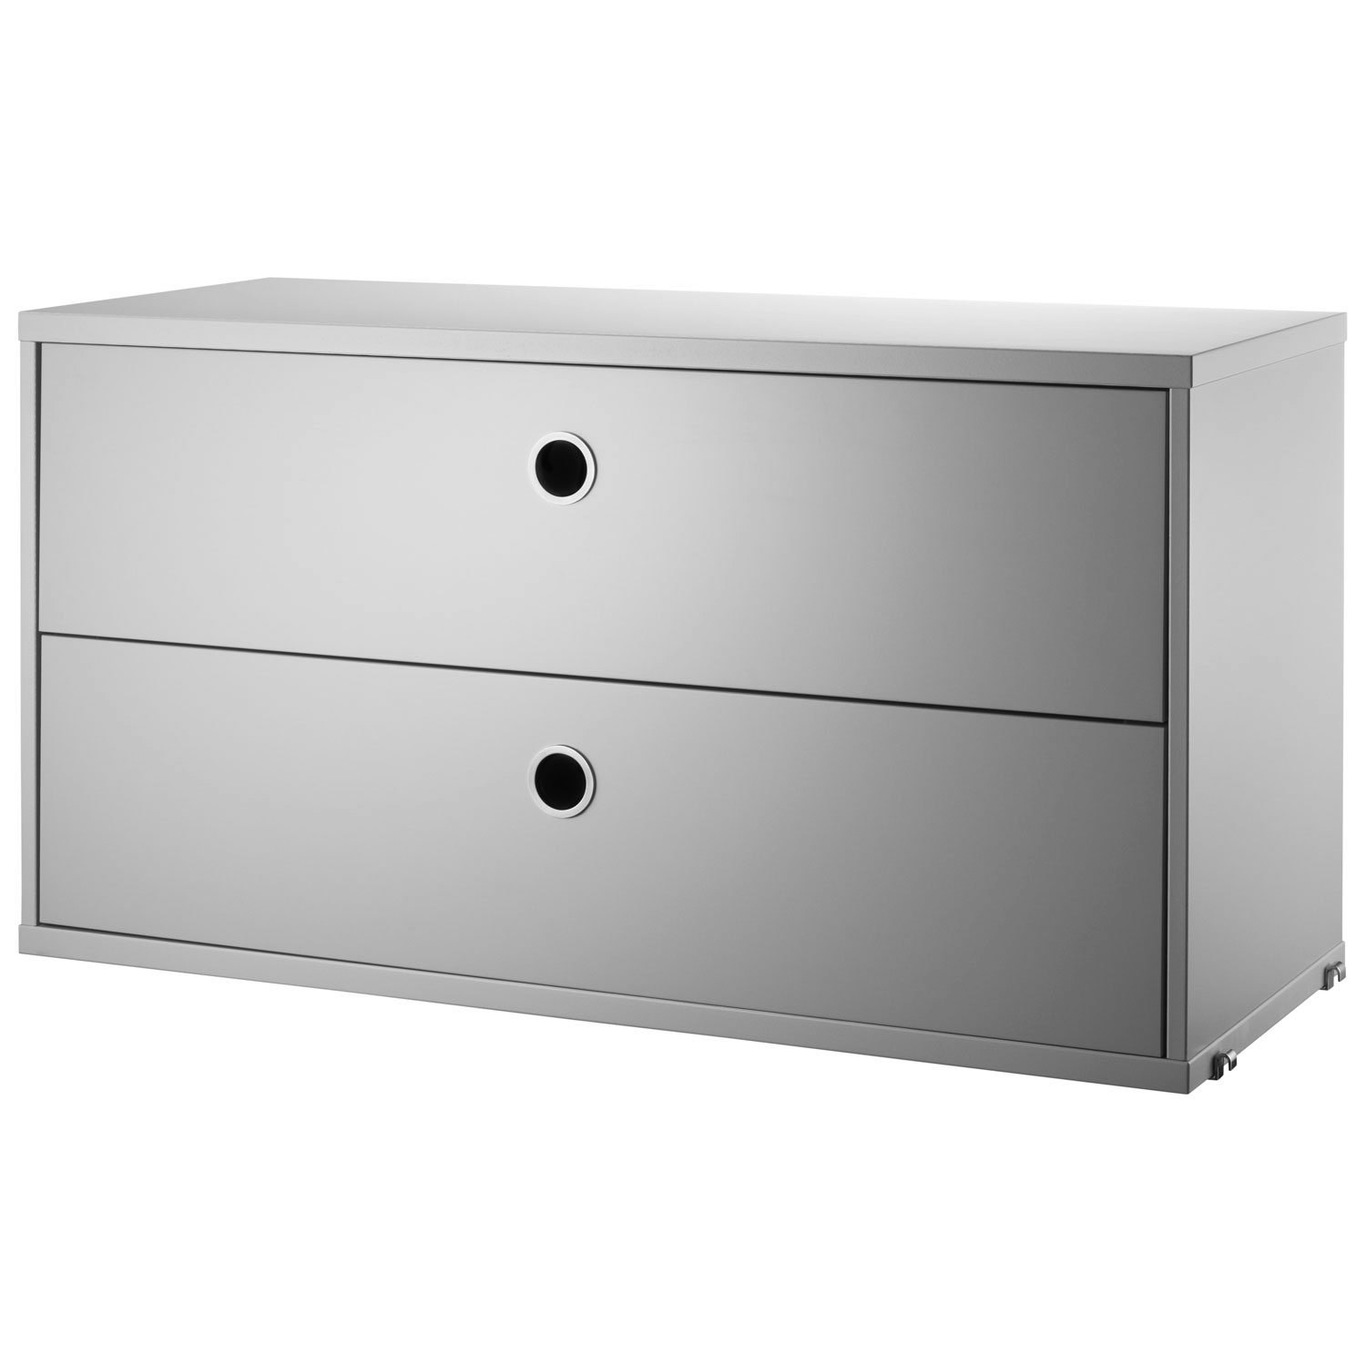 String Chest Of Drawers 78x30 cm, Grey